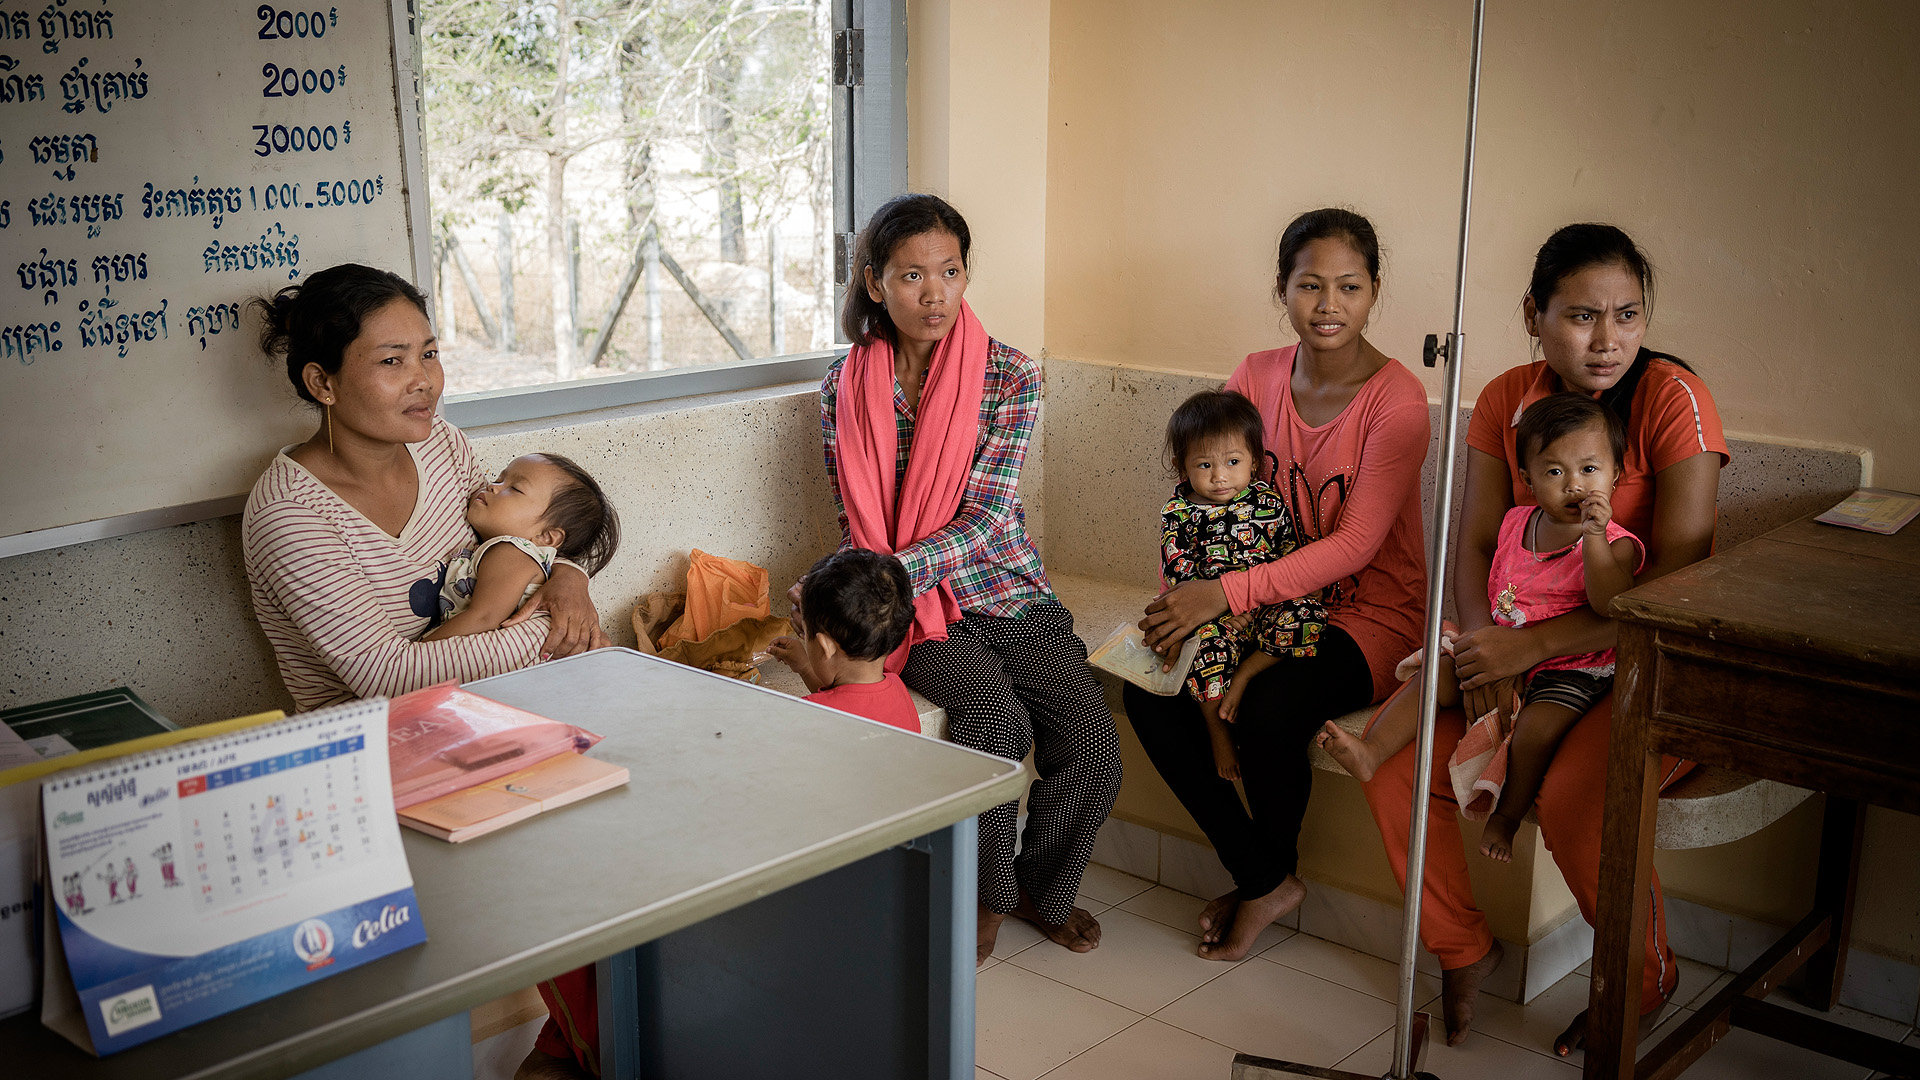 Mothers and children participating in a growth study are waiting in a waiting room in Prey Veng, Cambodia.